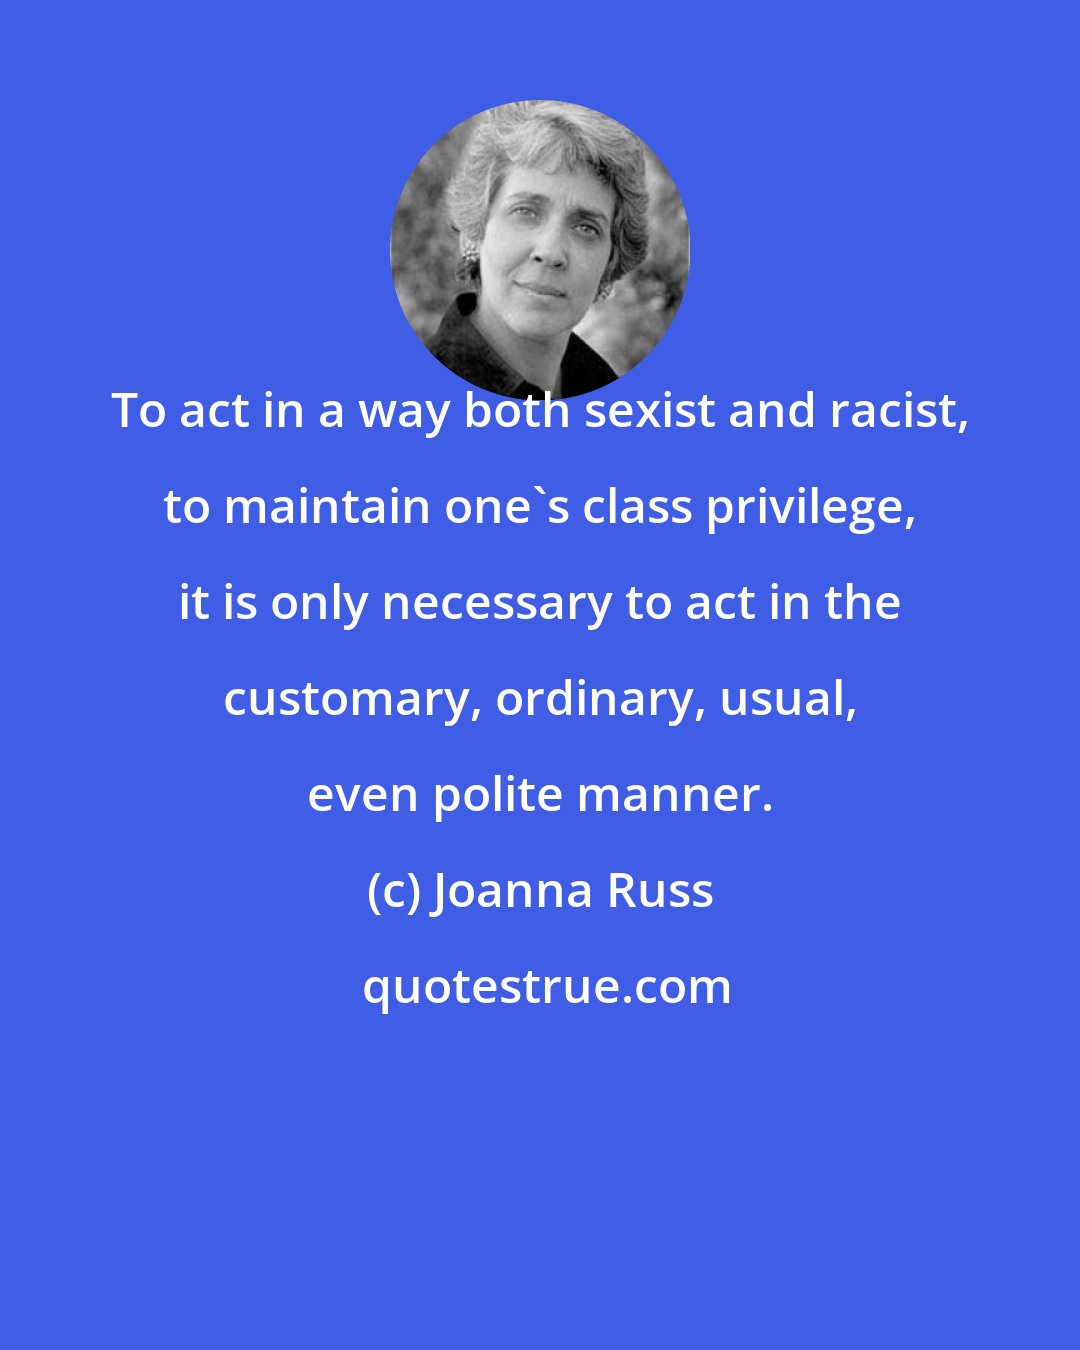 Joanna Russ: To act in a way both sexist and racist, to maintain one's class privilege, it is only necessary to act in the customary, ordinary, usual, even polite manner.